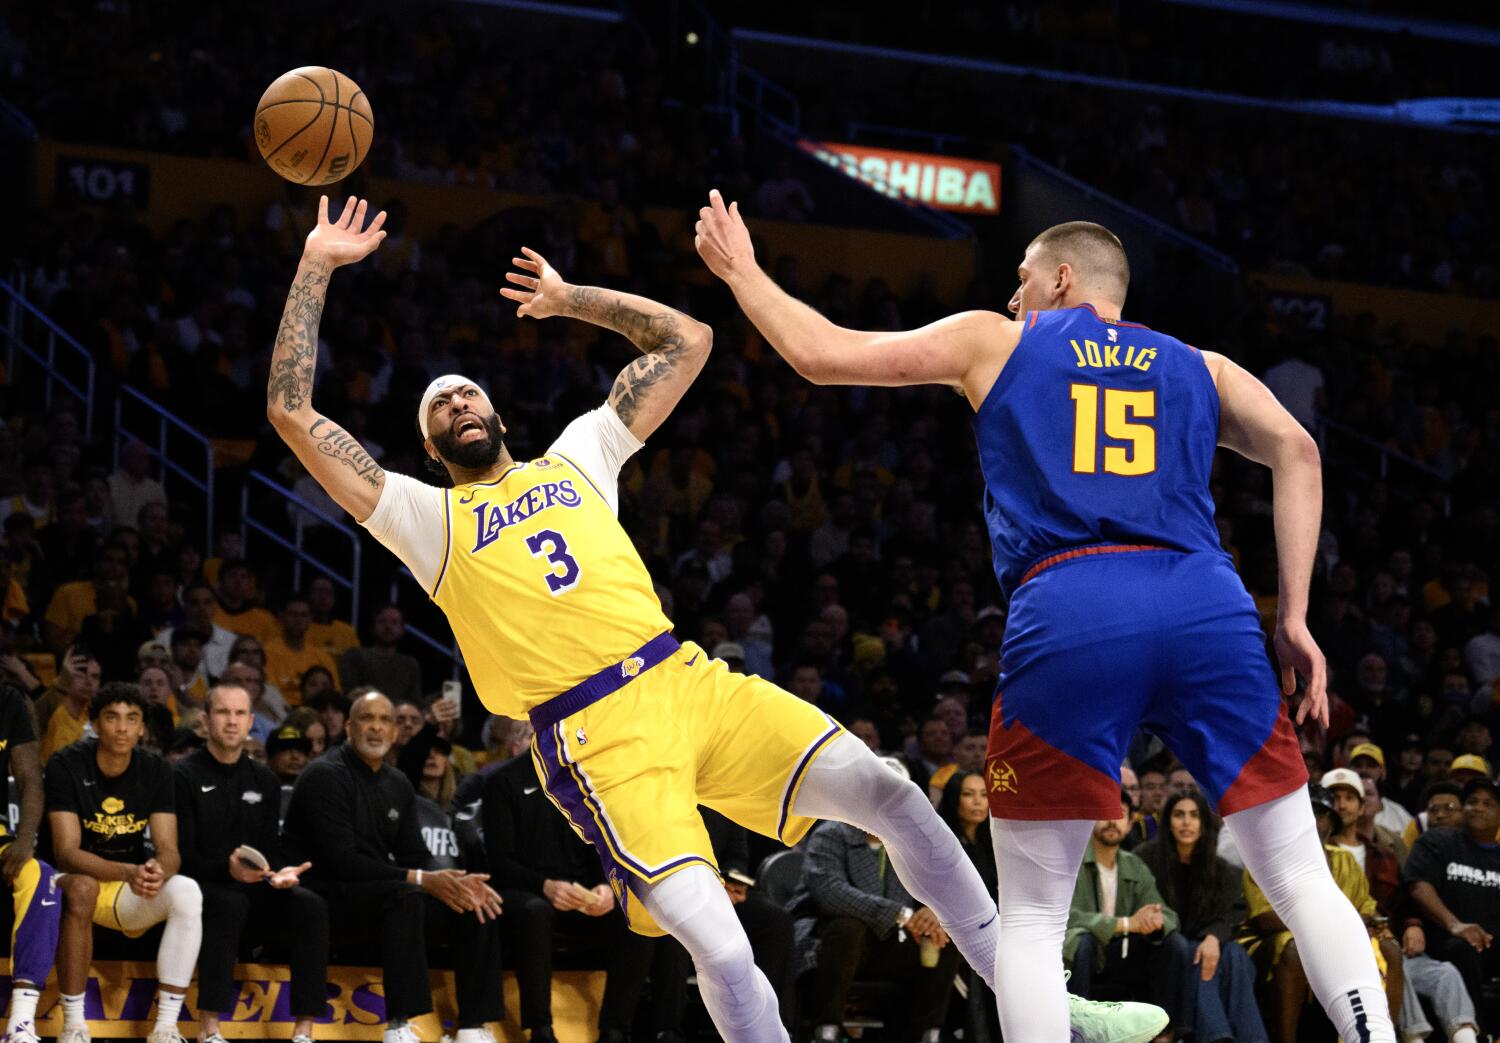 Lakers fade again in Game 3 loss to Denver, putting their season in peril